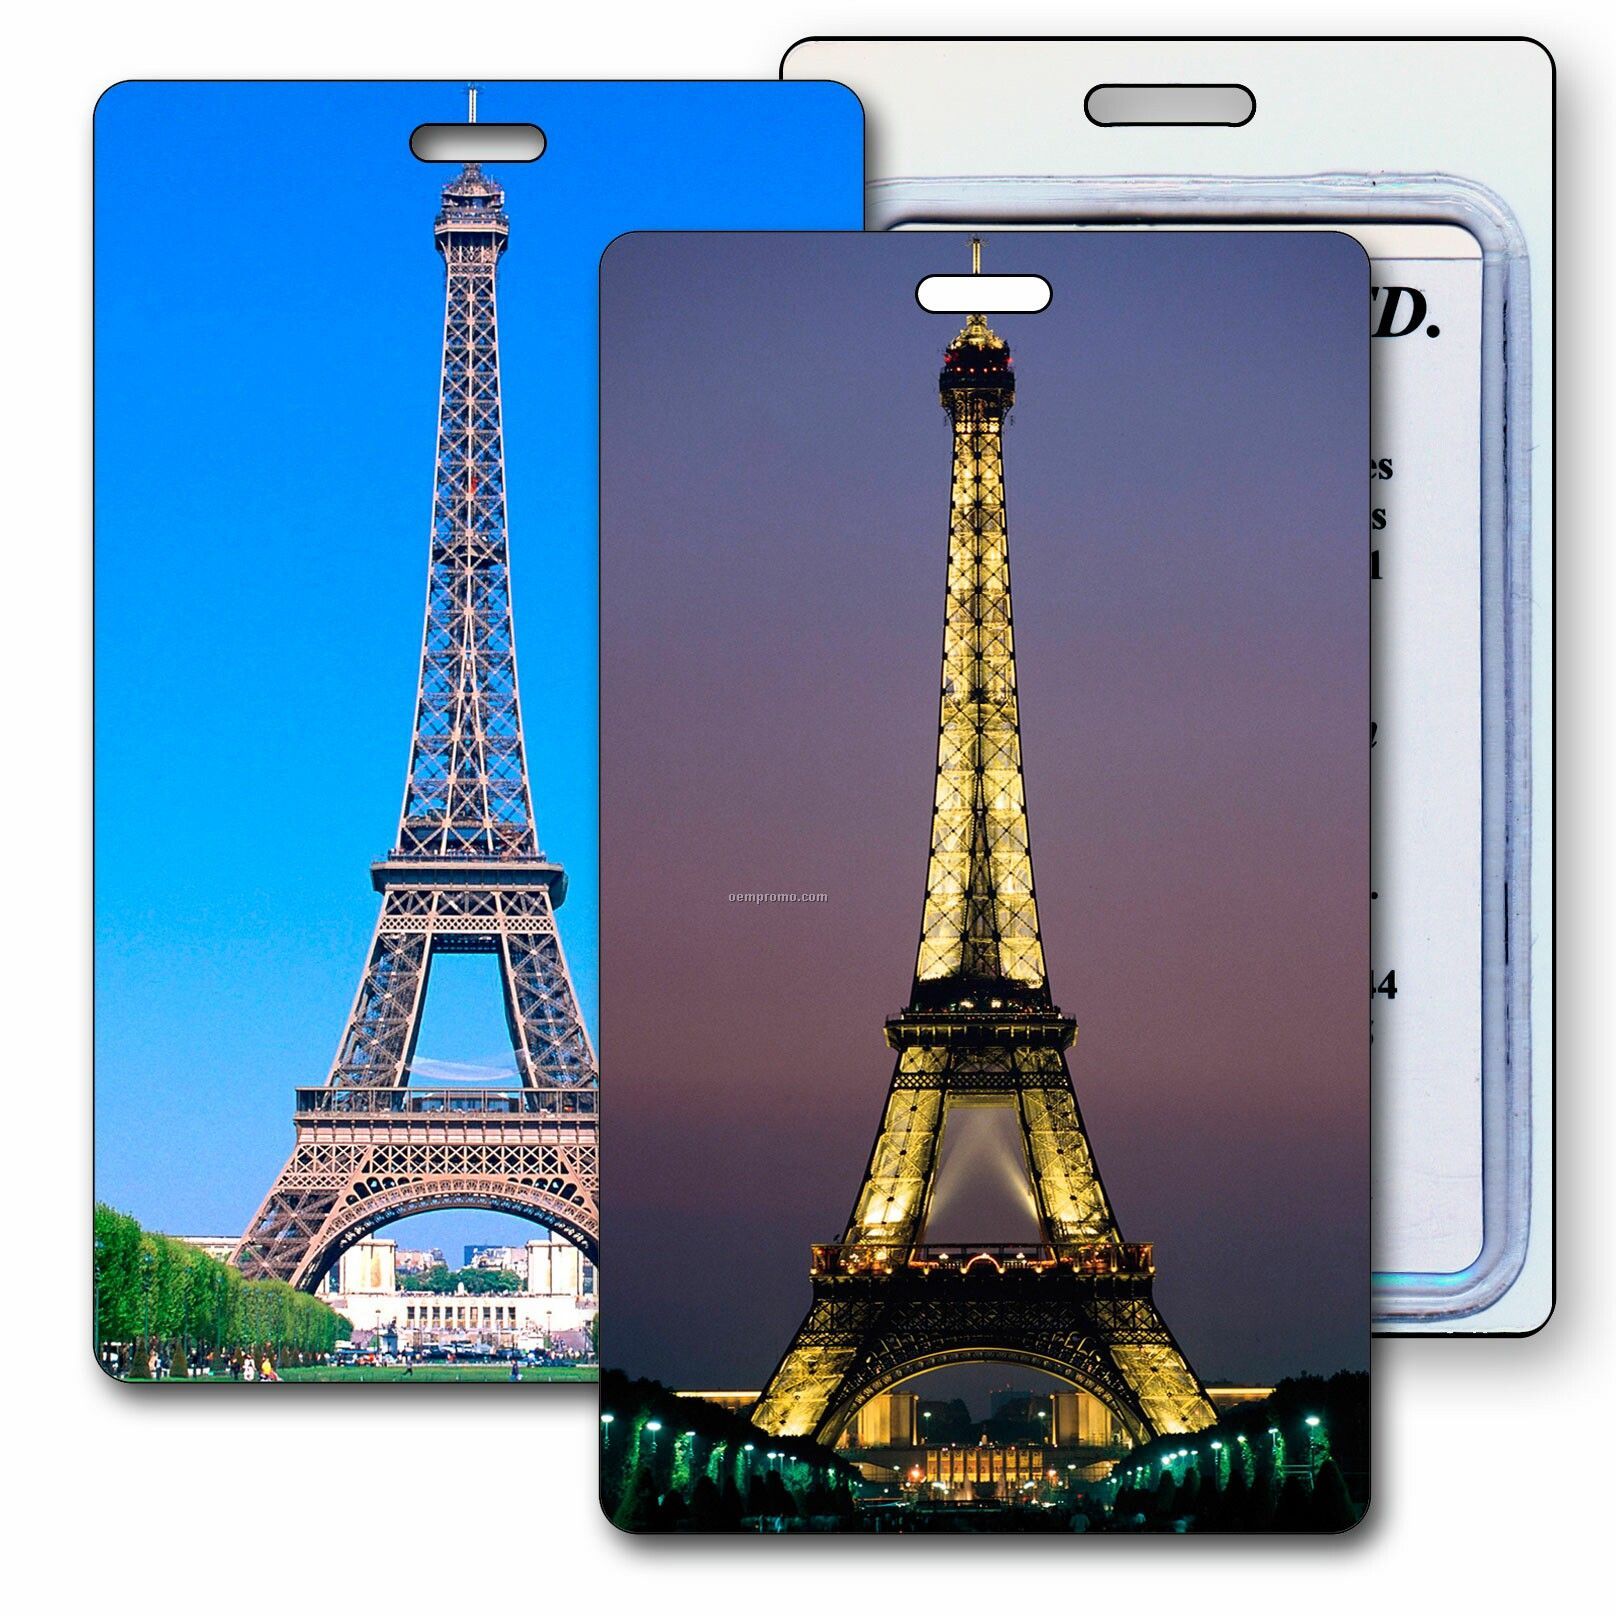 Luggage Tag 3d Lenticular Eiffel Tower Paris Stock Image (Imprint Product)